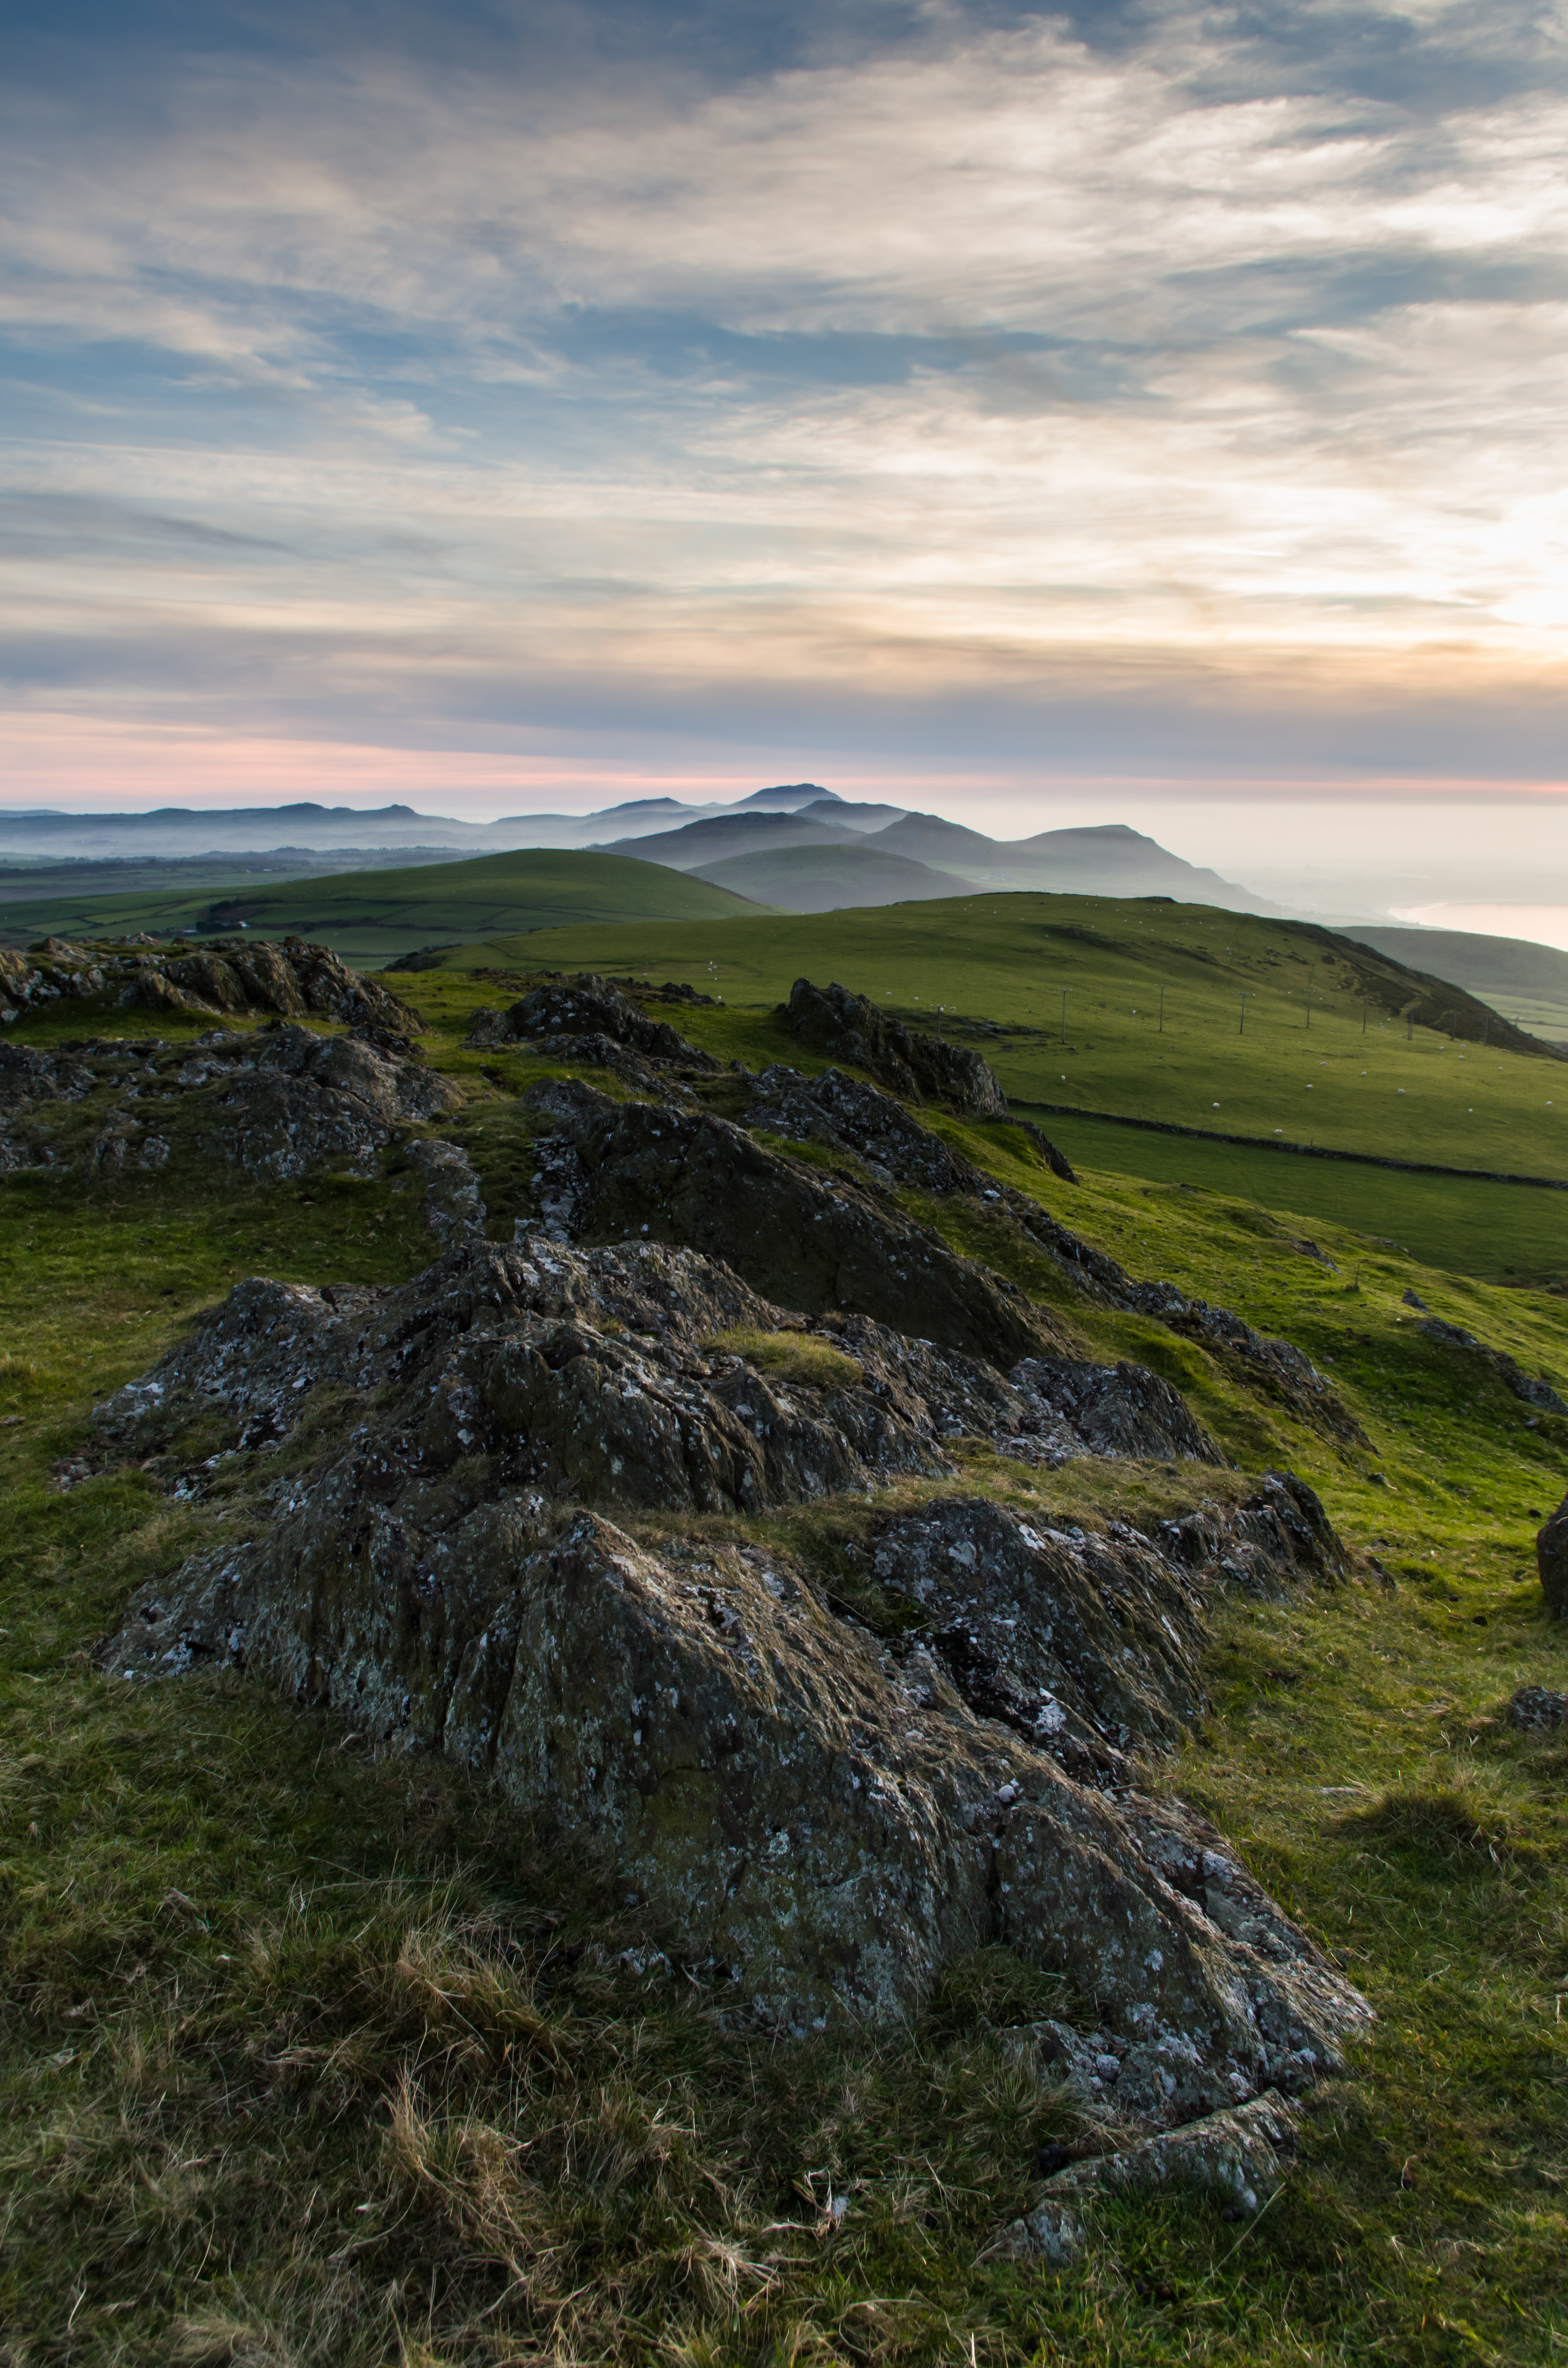 The Mountains of the Llyn Peninsula